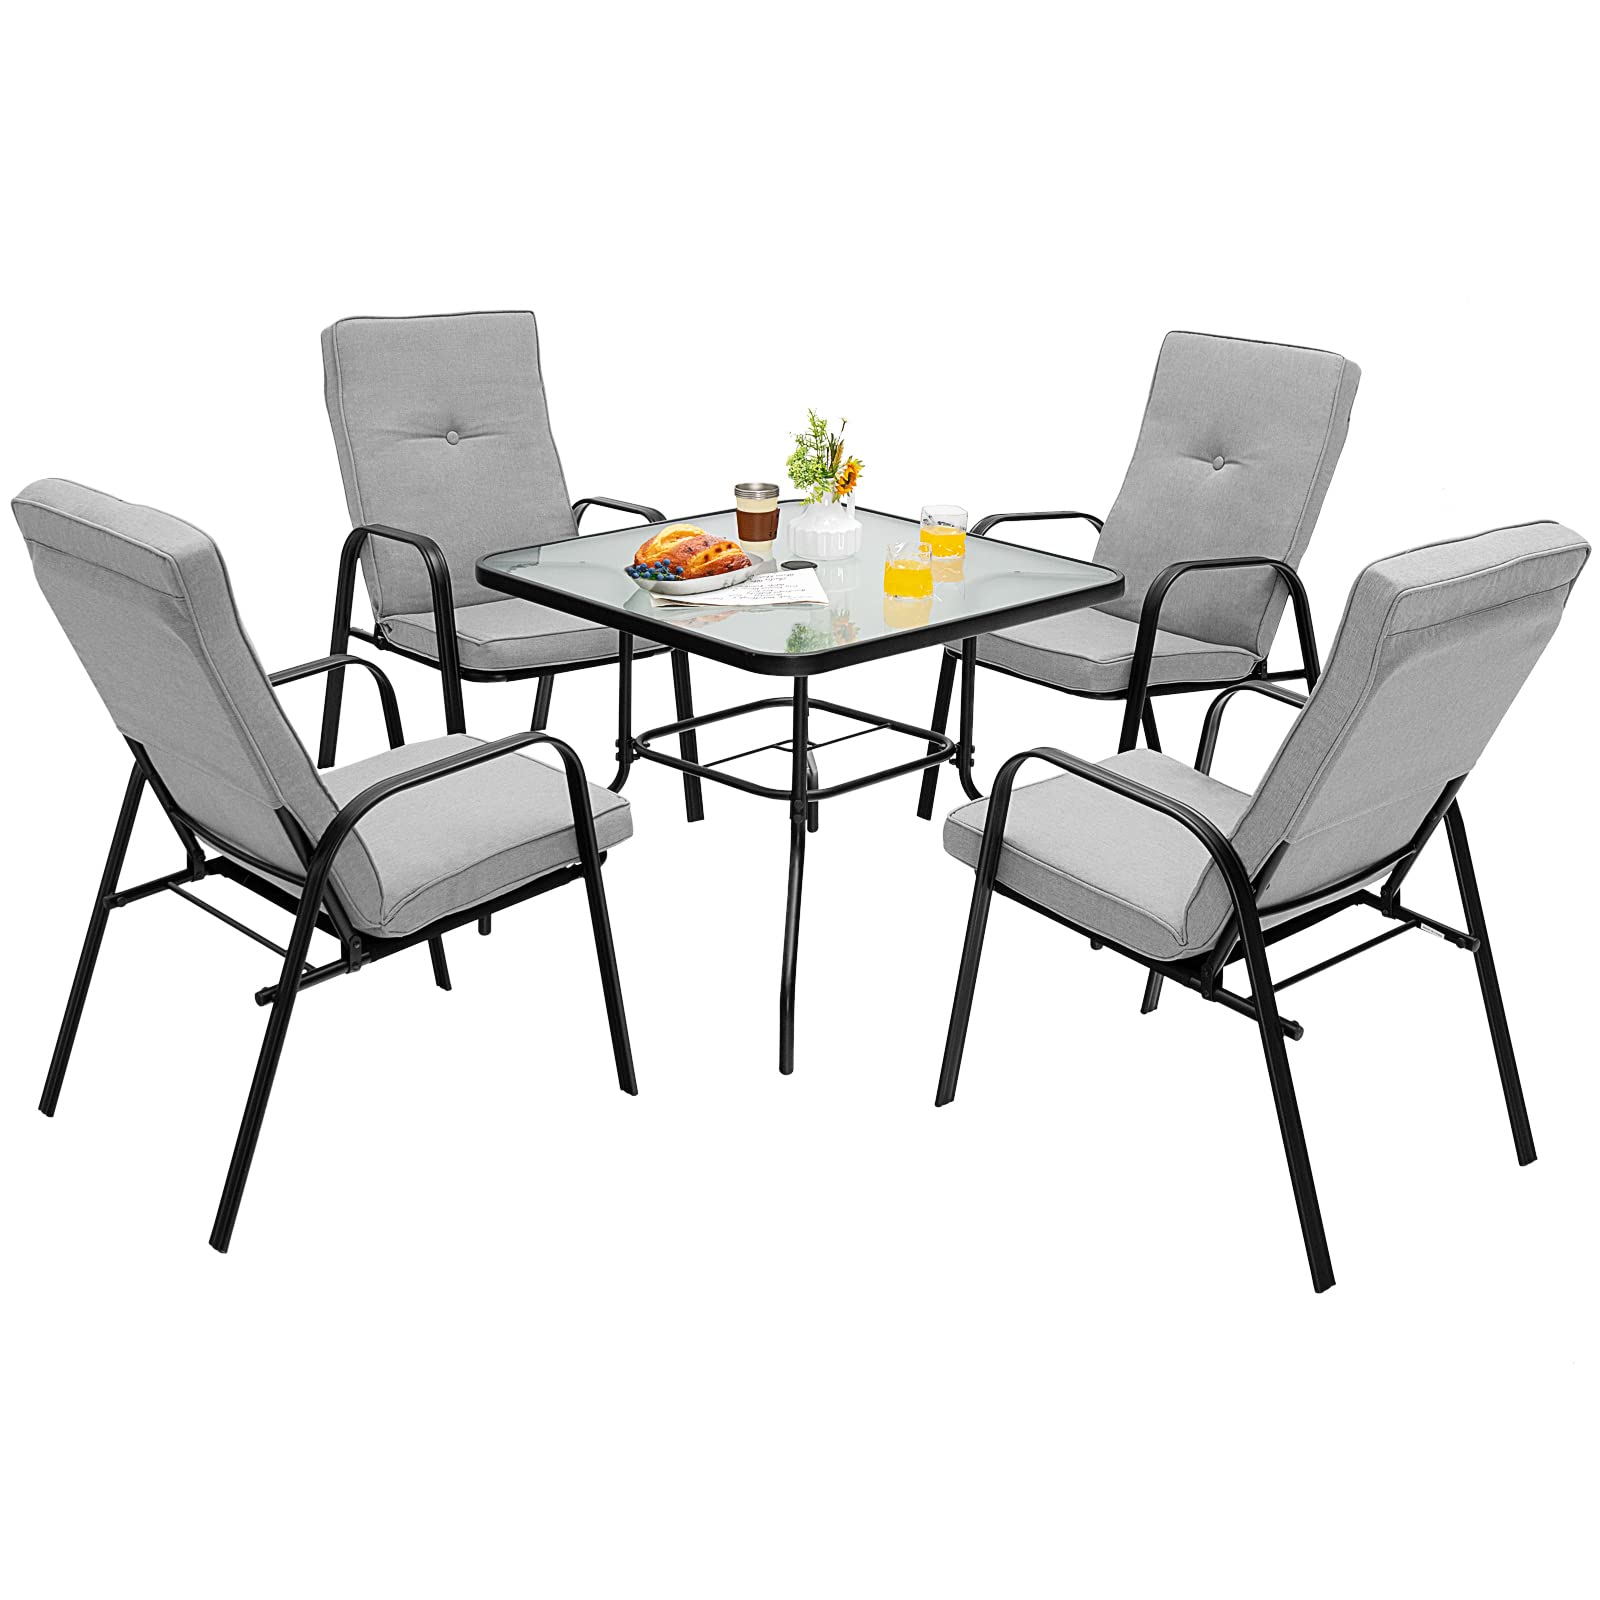 Giantex 4 Piece Patio Dining Chairs, Outdoor Stackable Chairs